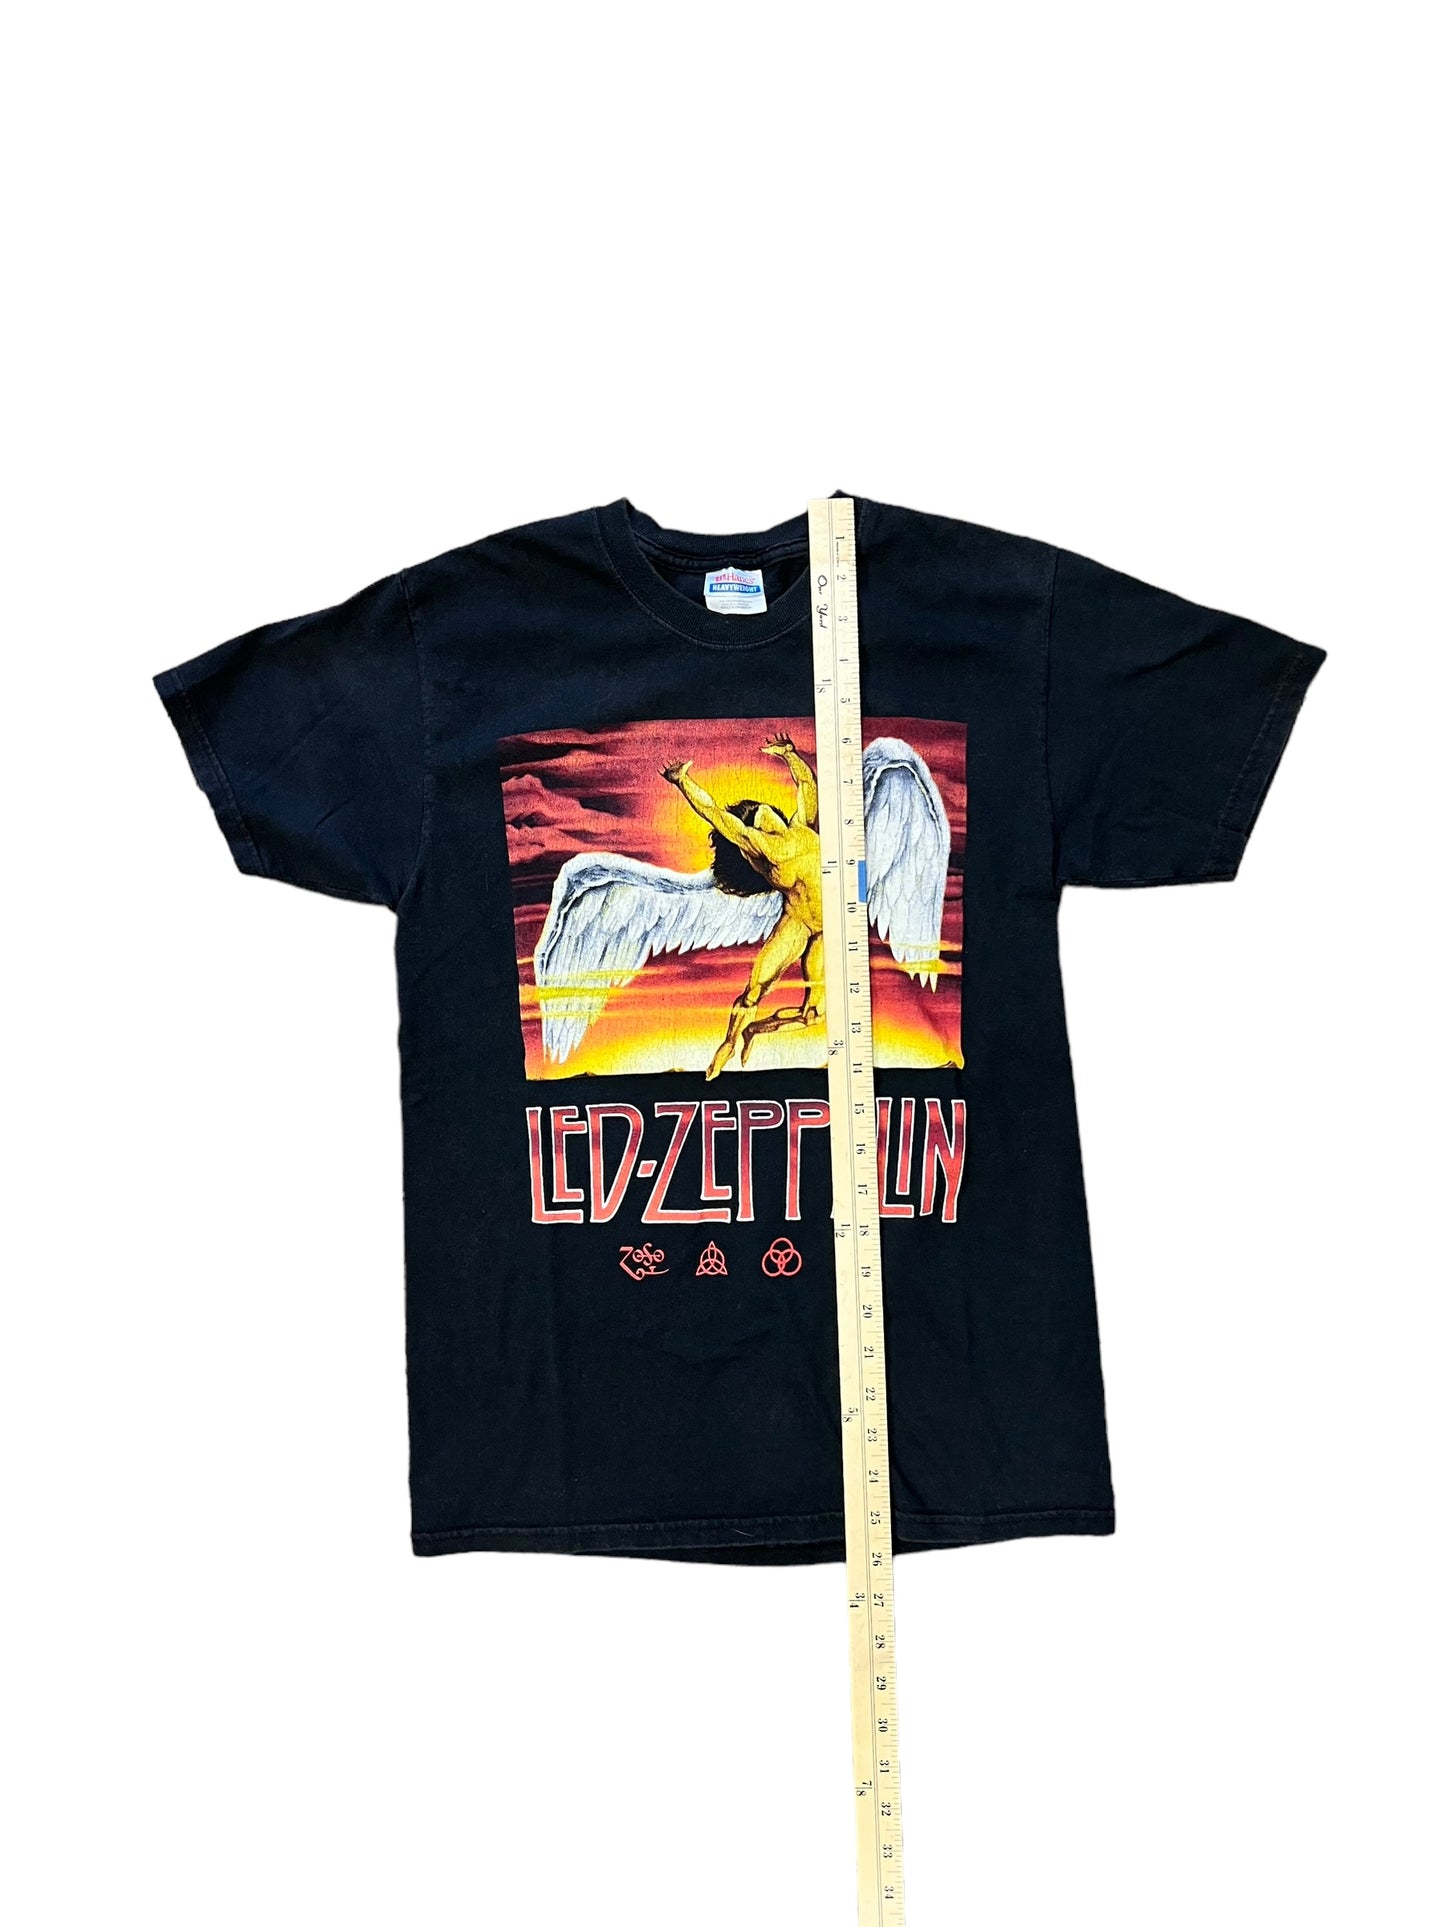 Vintage Led Zeppelin Tee - Small